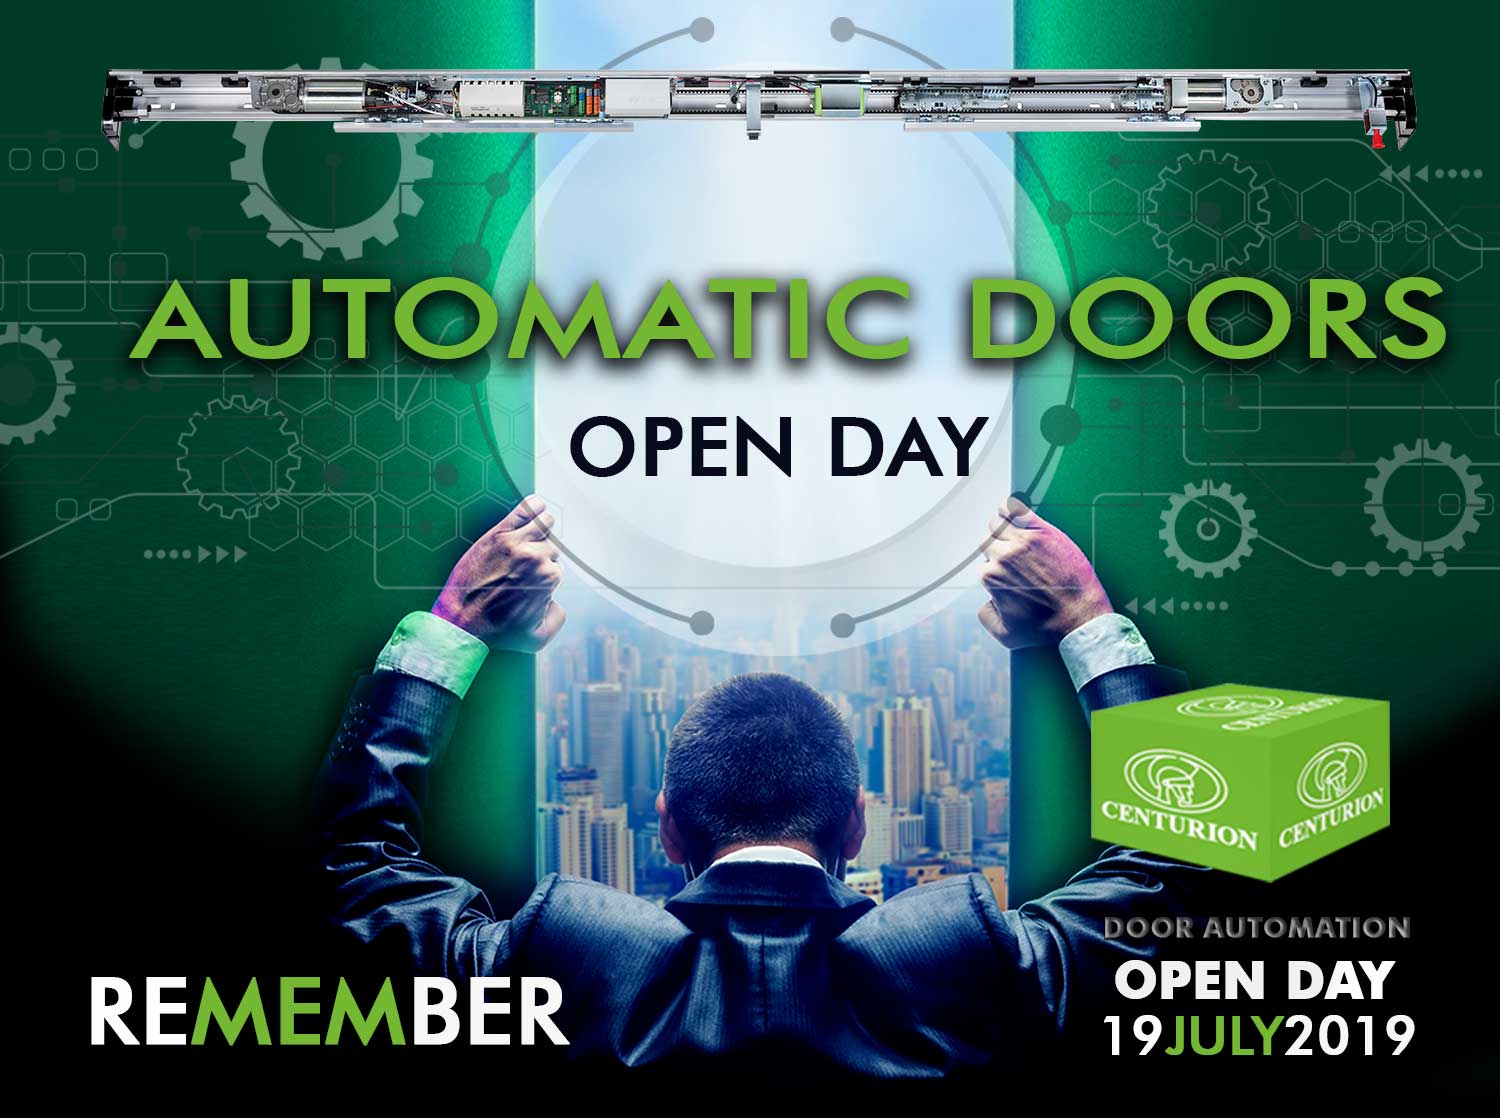 Reminder: Come Meet the Royalty of Door Automation at CENTURION Bloemfontein